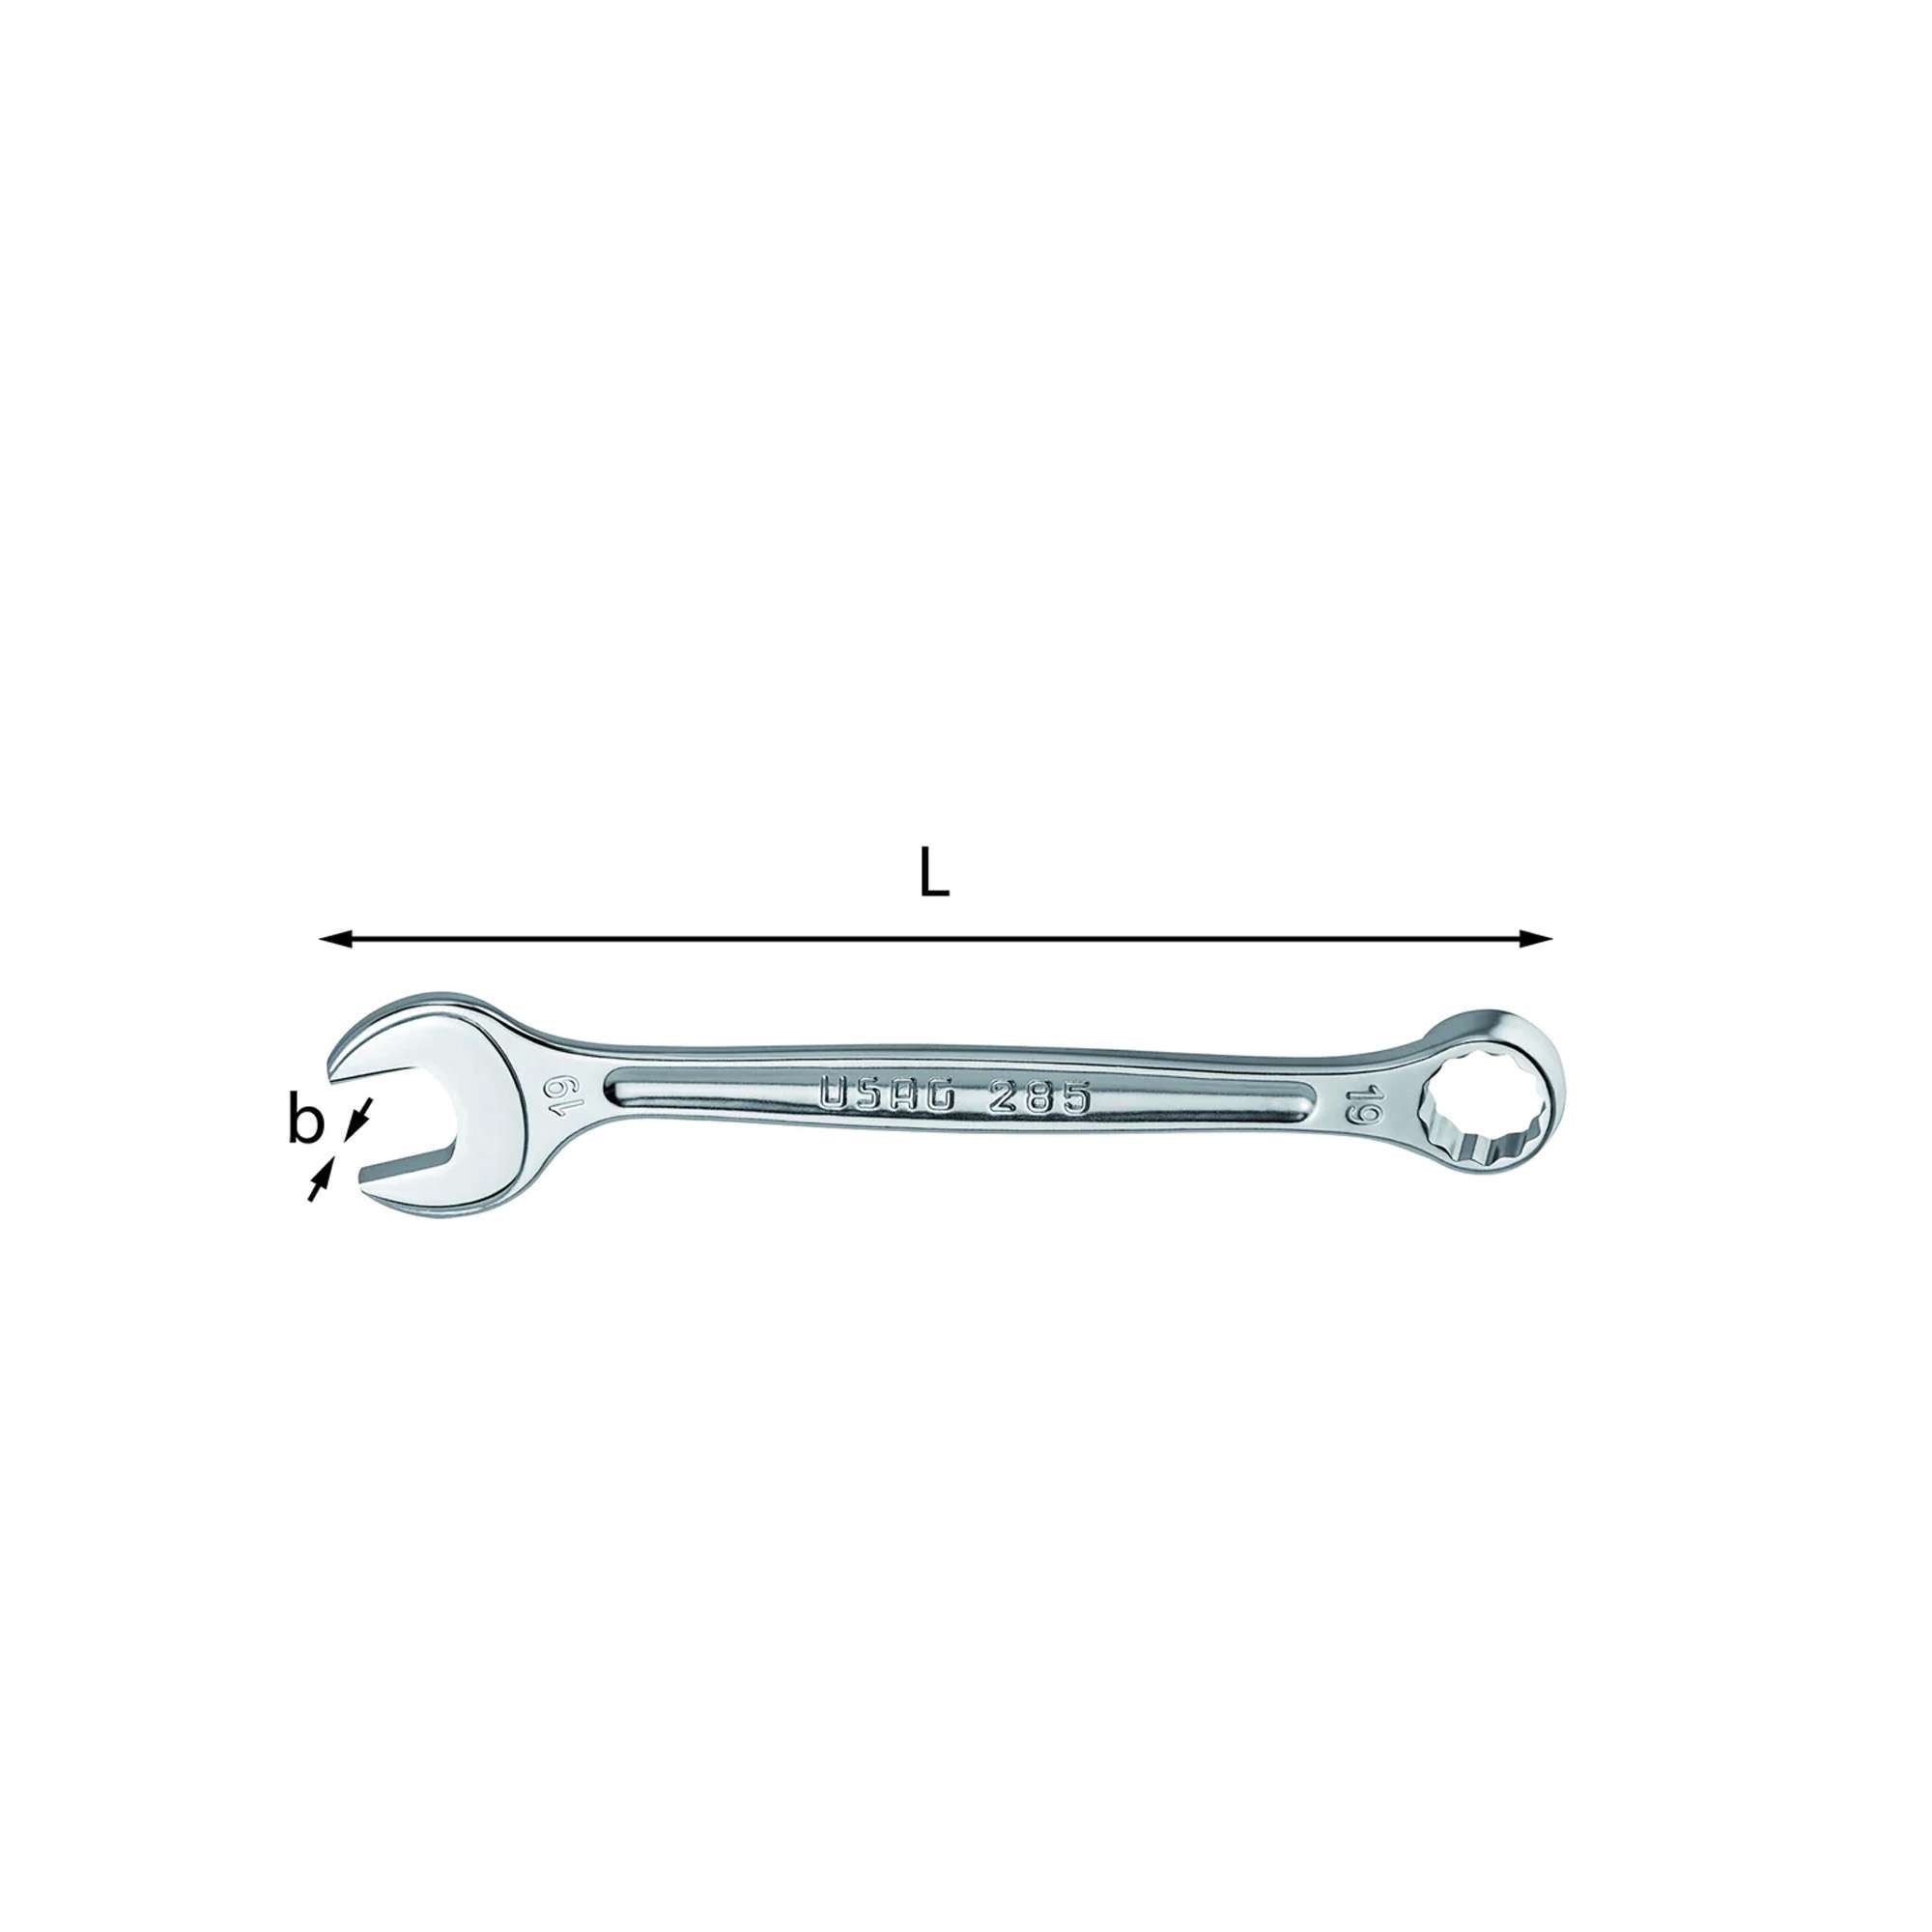 Combination wrenches - Usag 285